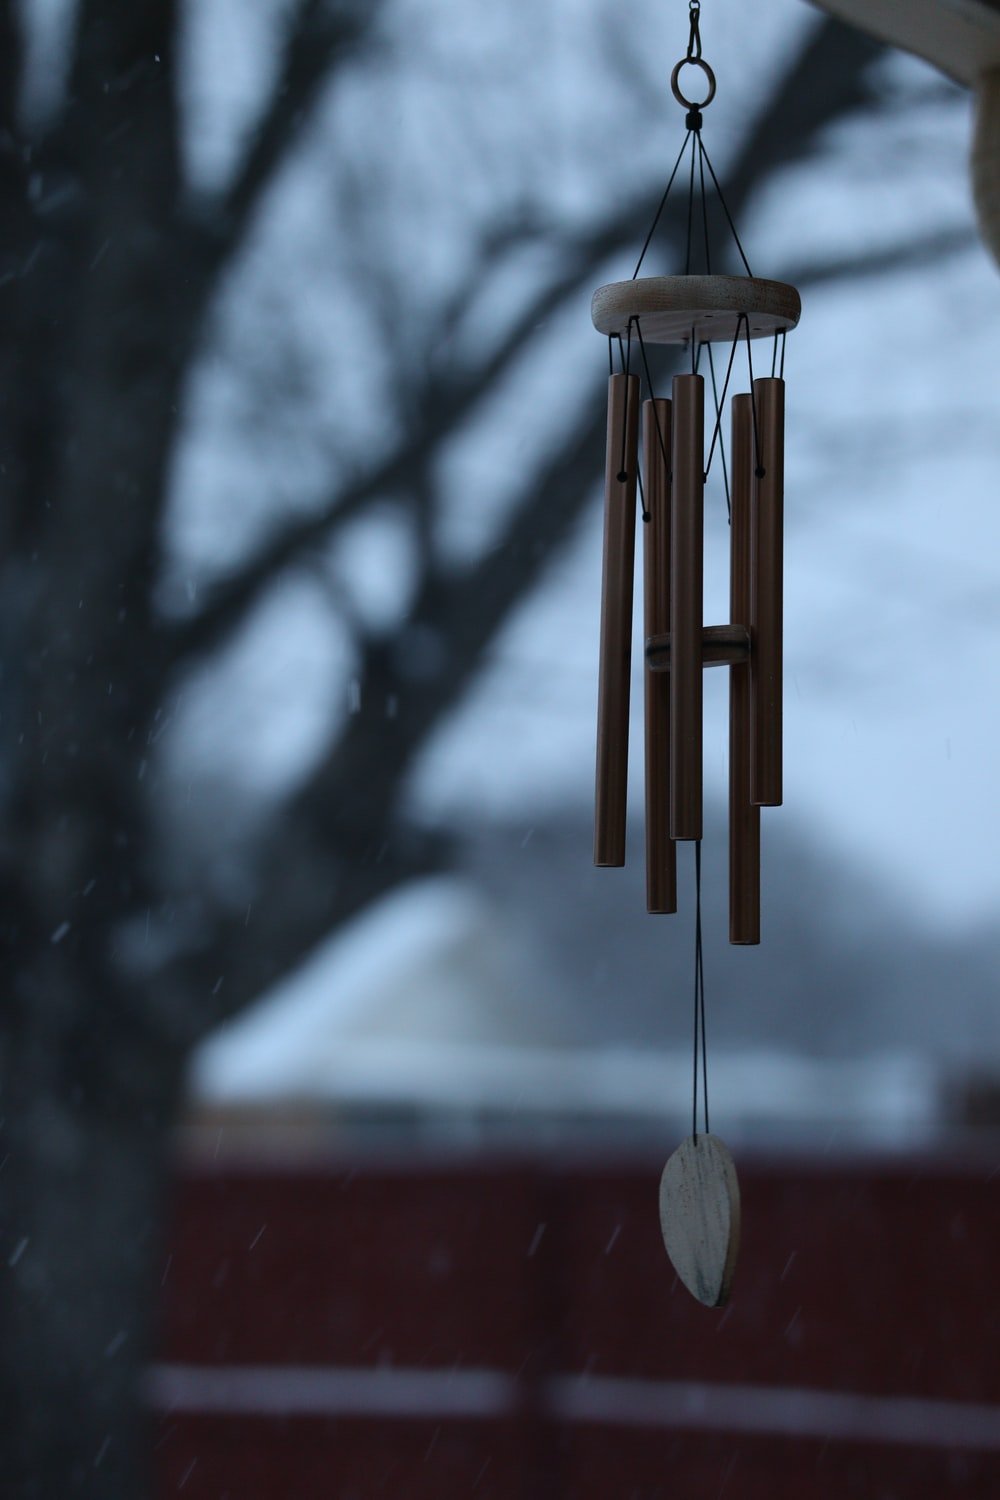 China Wind Chimes Mobile Wallpaper Images Free Download on Lovepik |  400677740